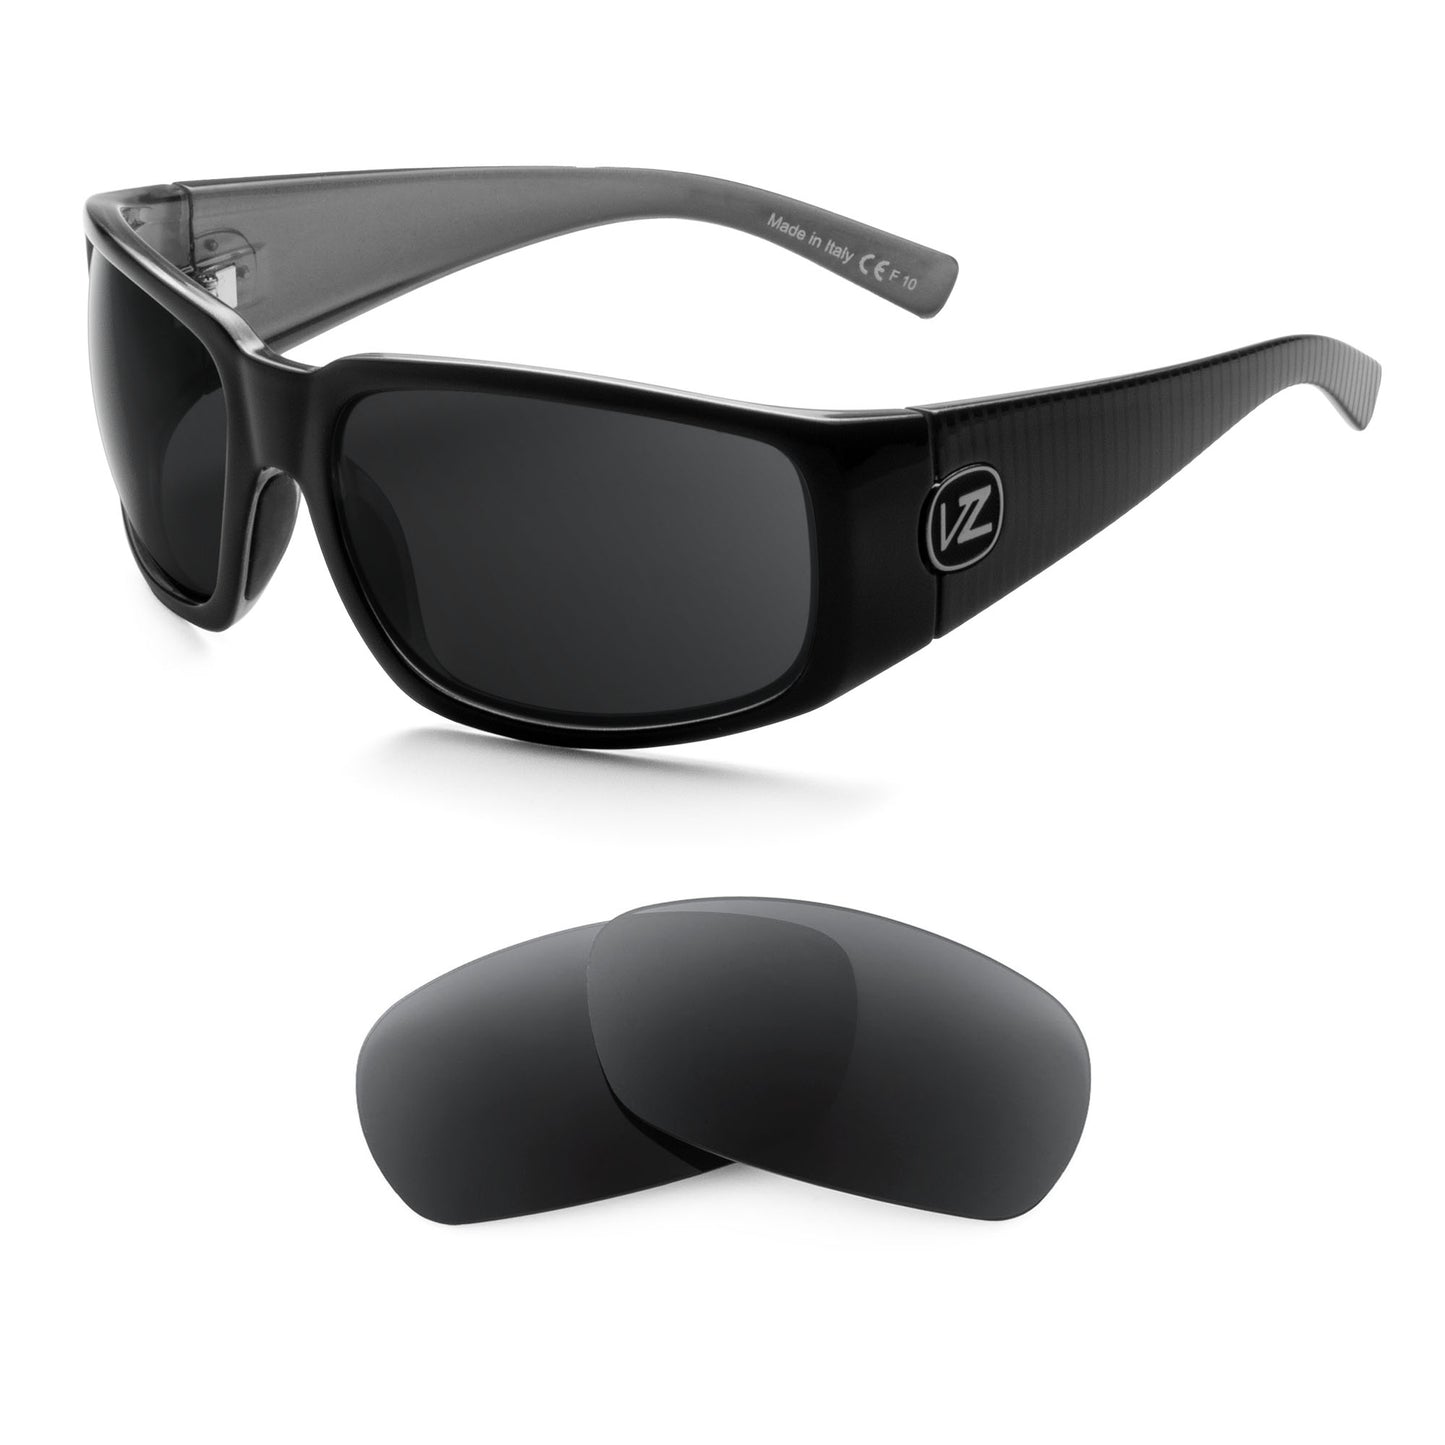 VonZipper Palooka sunglasses with replacement lenses